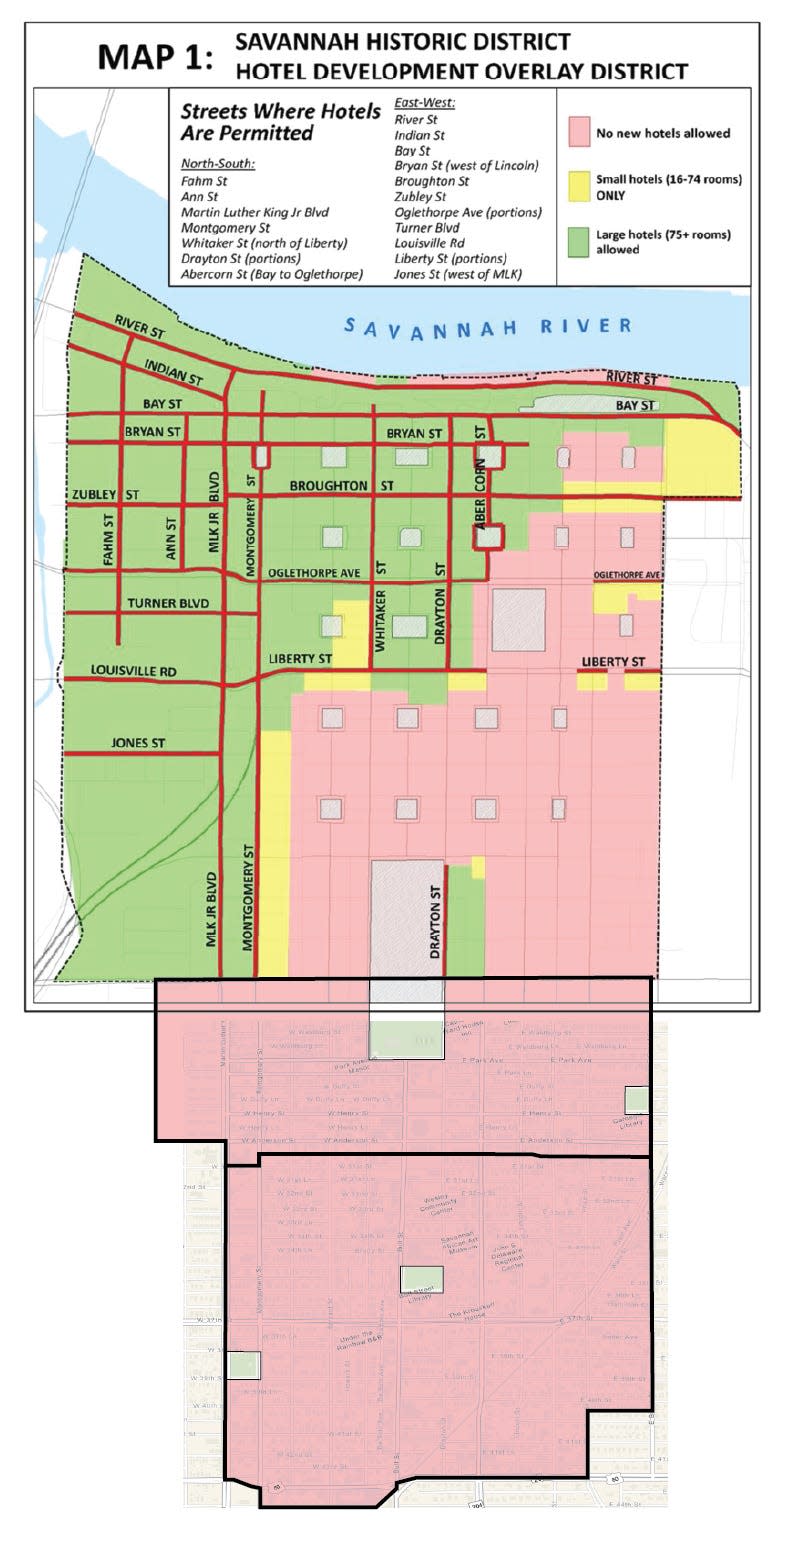 Image with current overlay plus proposed expansion to Victorian and Thomas Square neighborhoods